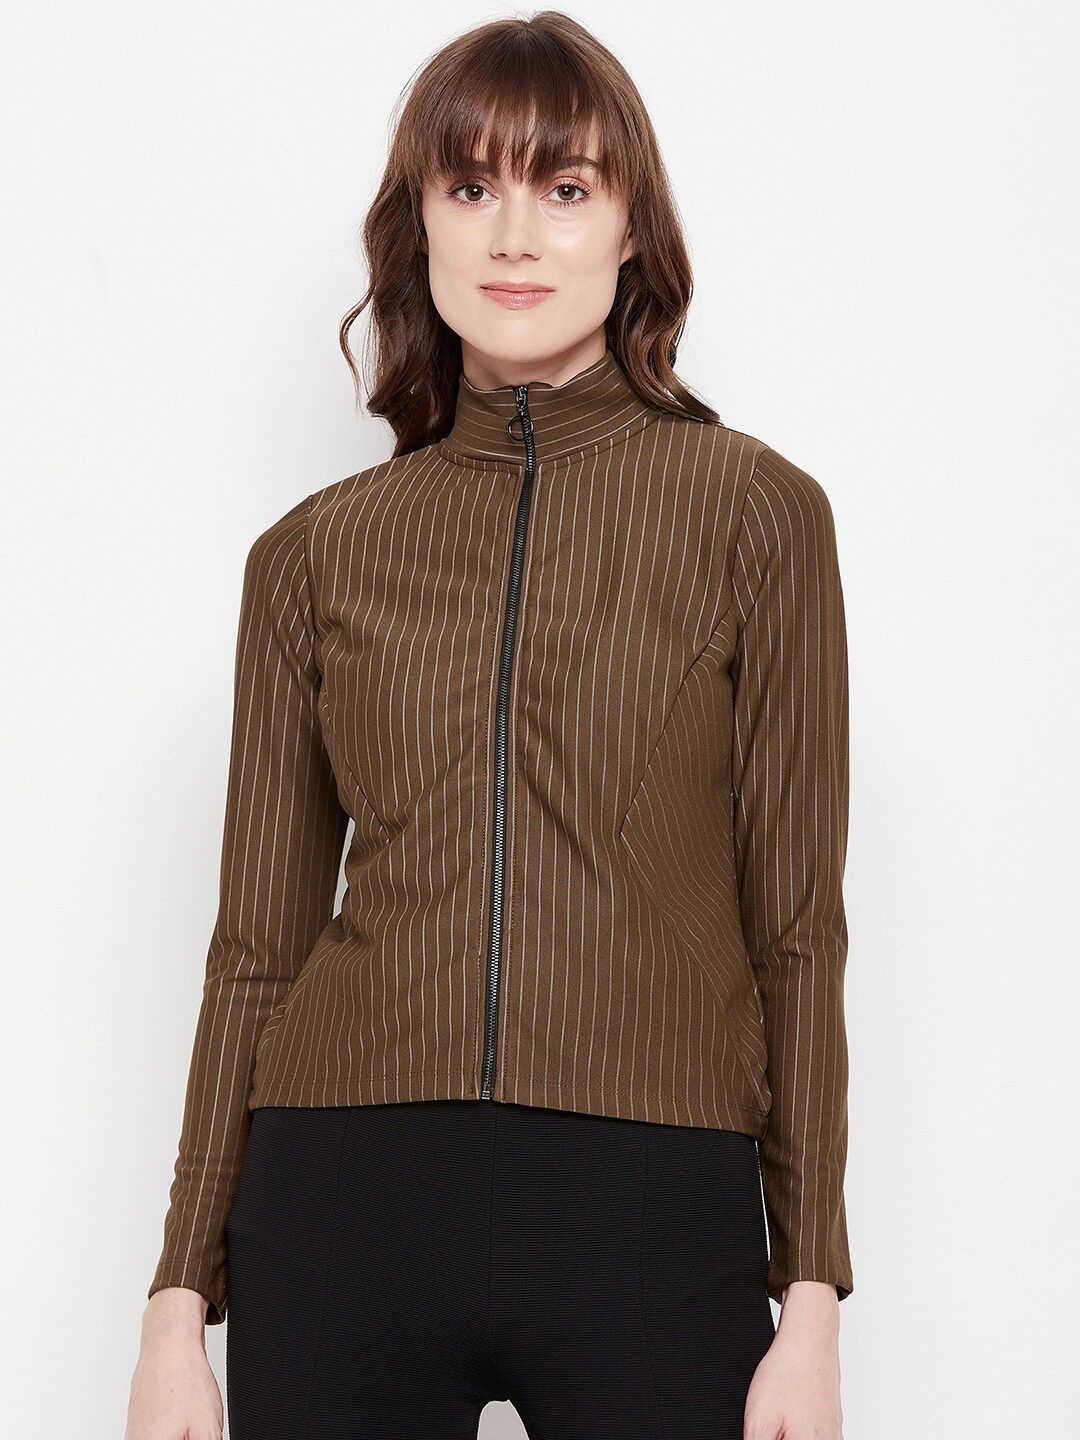 Madame Brown Striped Top Price in India